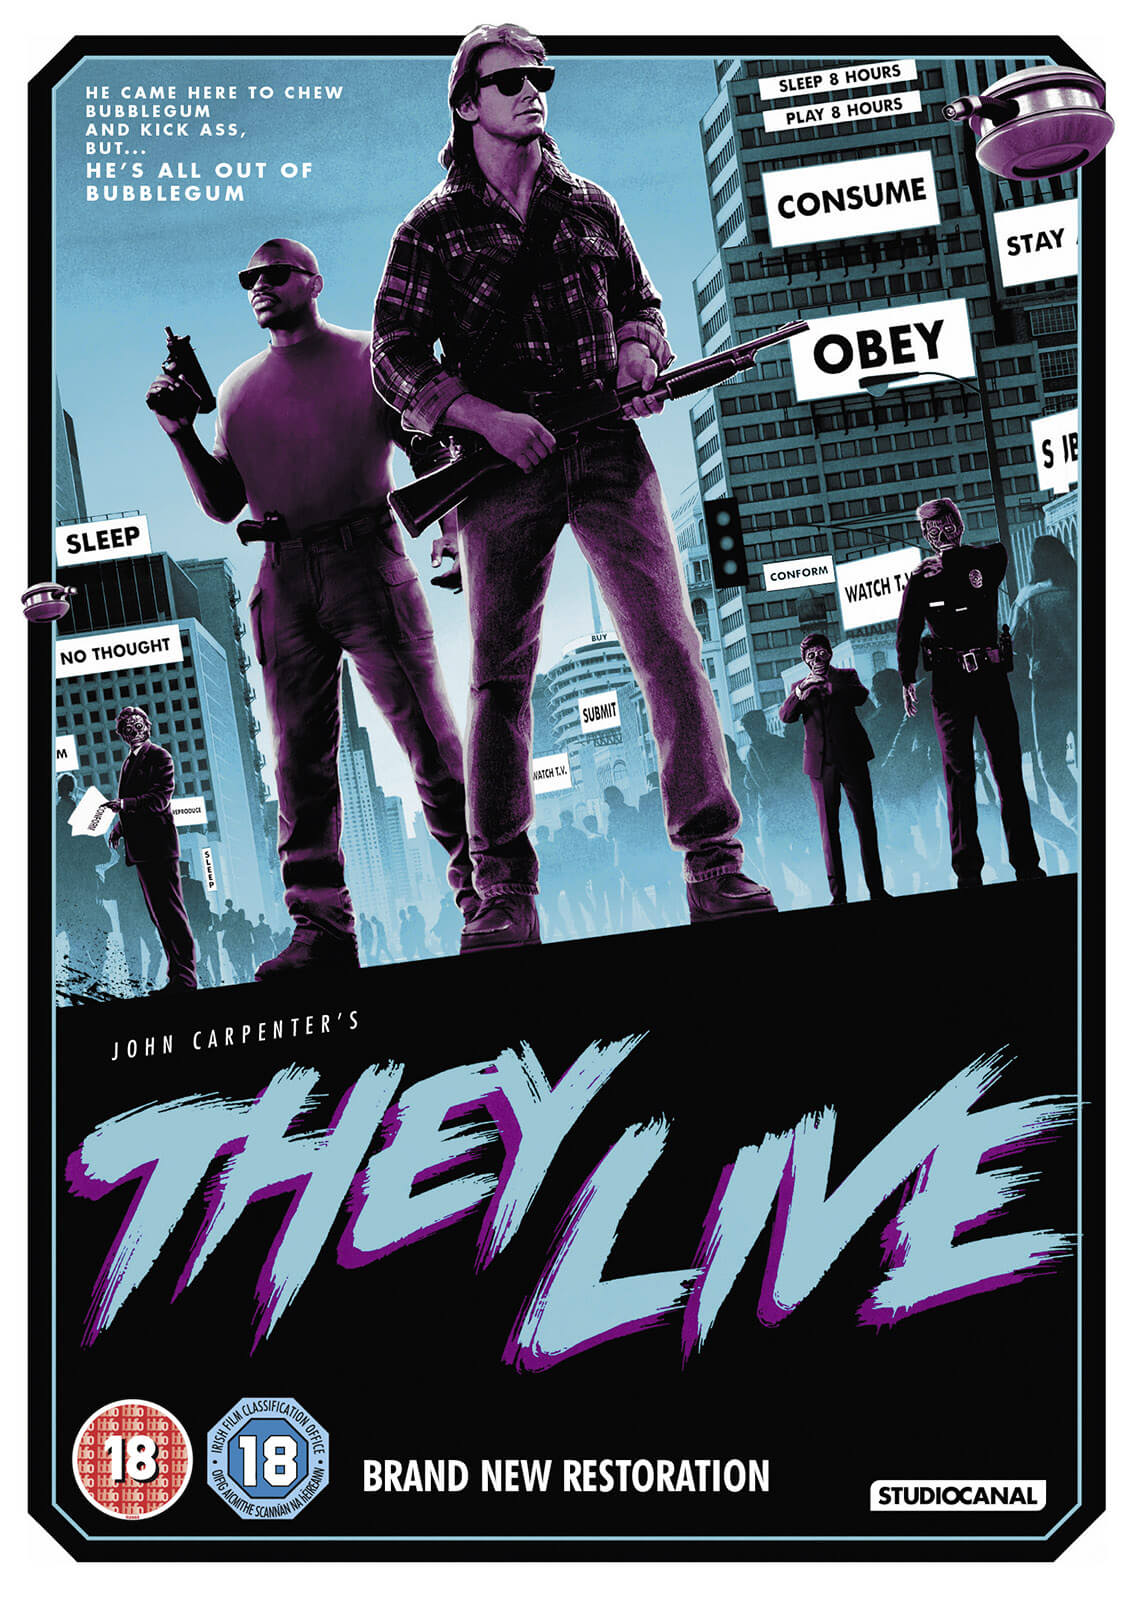 They Live 4K Blu-ray (Collector's Edition)